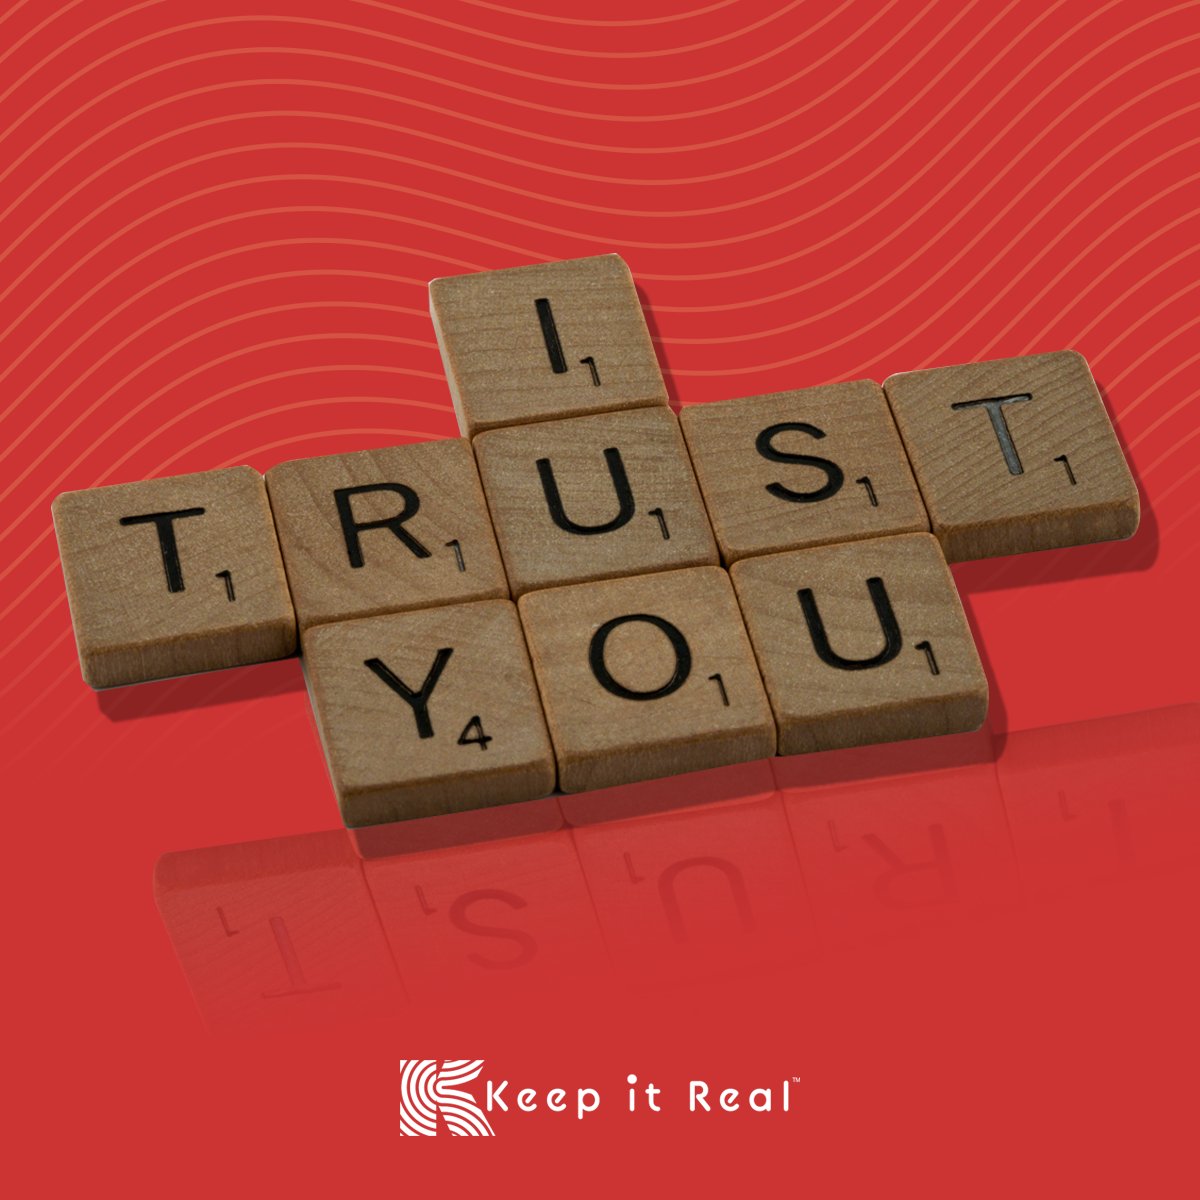 🙋 To earn TRUST, you must show TRUST

👉 Set clear goals and expectations and trust your team to do what they were hired to do 

peoplethink.biz

#leadershipcoach #leadershipmantra #leadershipdevelopment #keepitreal #peoplethink #Keepitrealleadership #Leadershipcoaching